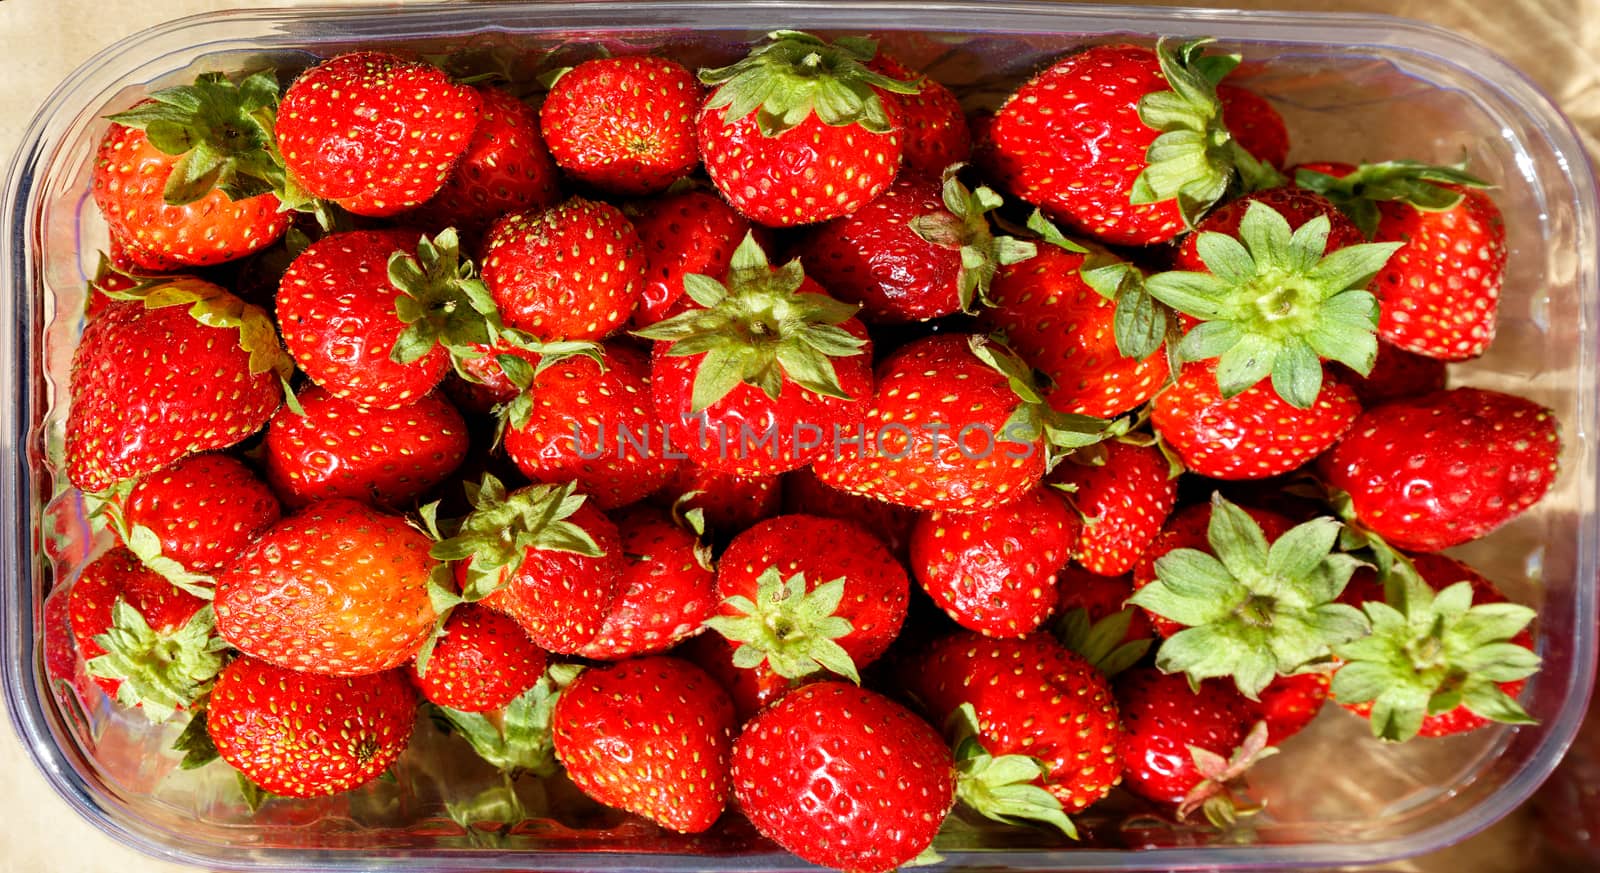 Red ripe strawberries are in a plastic container. by Sergii